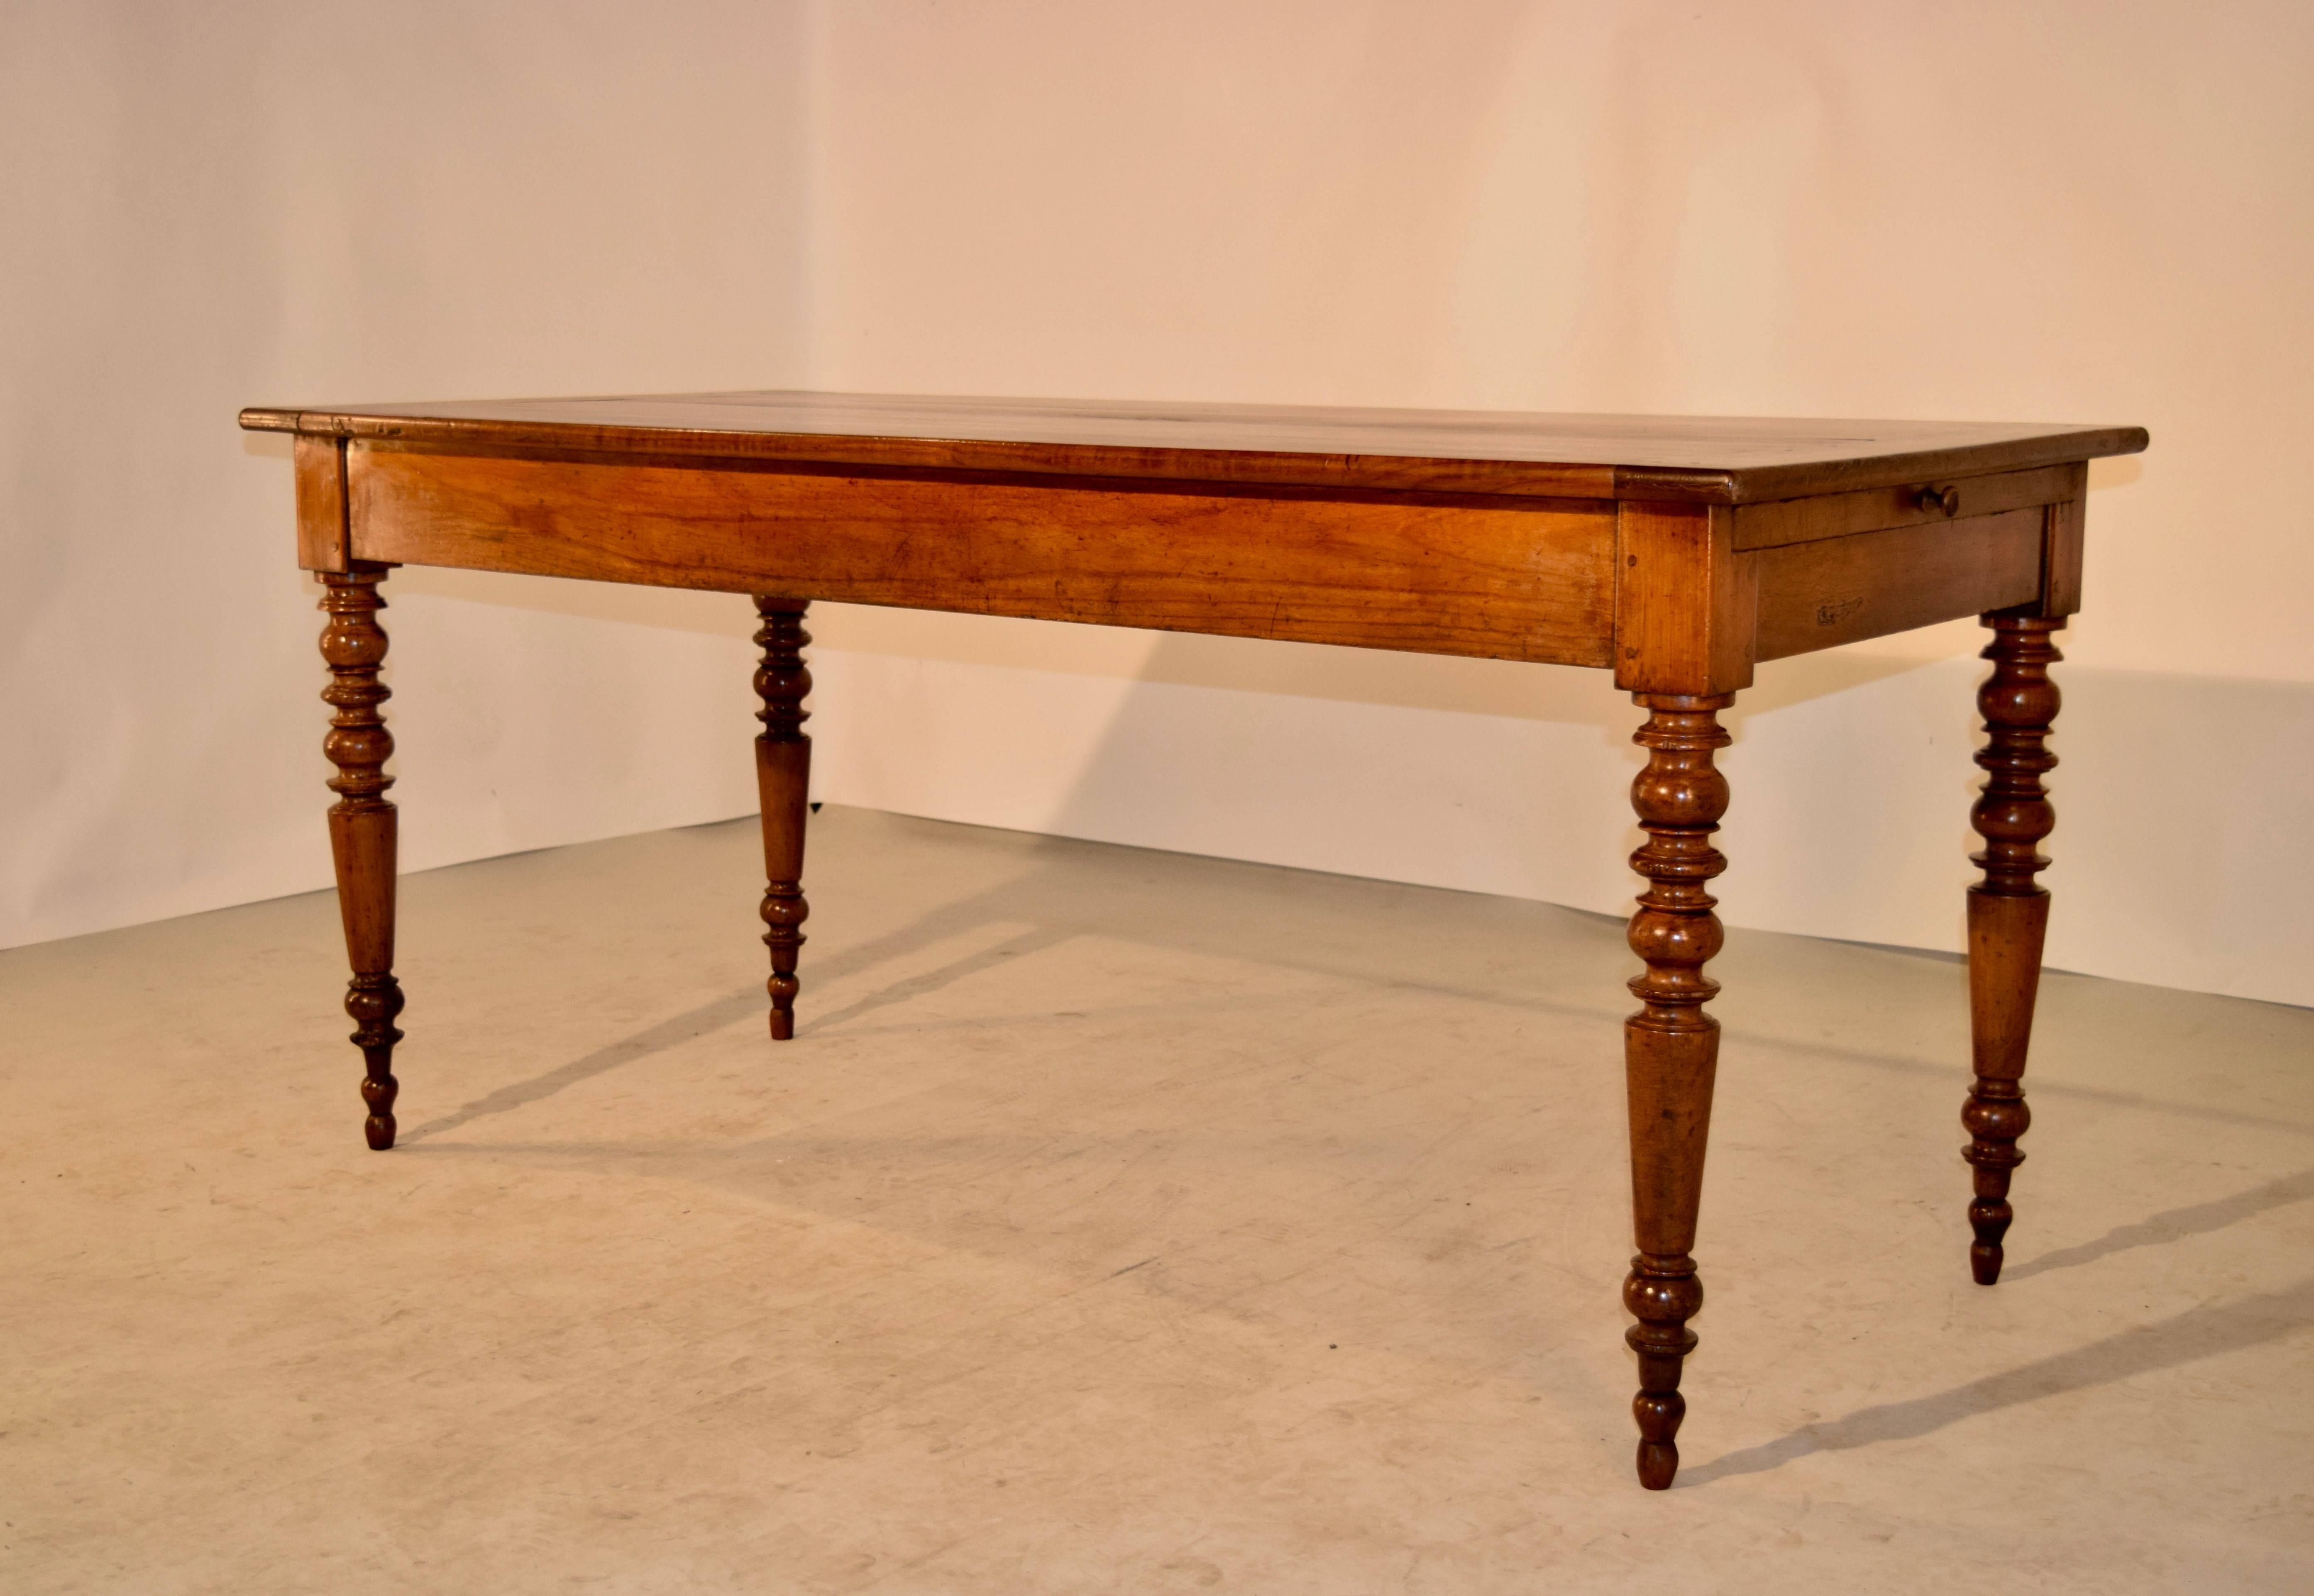 19th century French farm table made from cherry. The top is made up of thick cherry planks, and has banded ends, following down to a simple apron, which contains a drawer at one end and an extending bread board on the opposite end. The table is